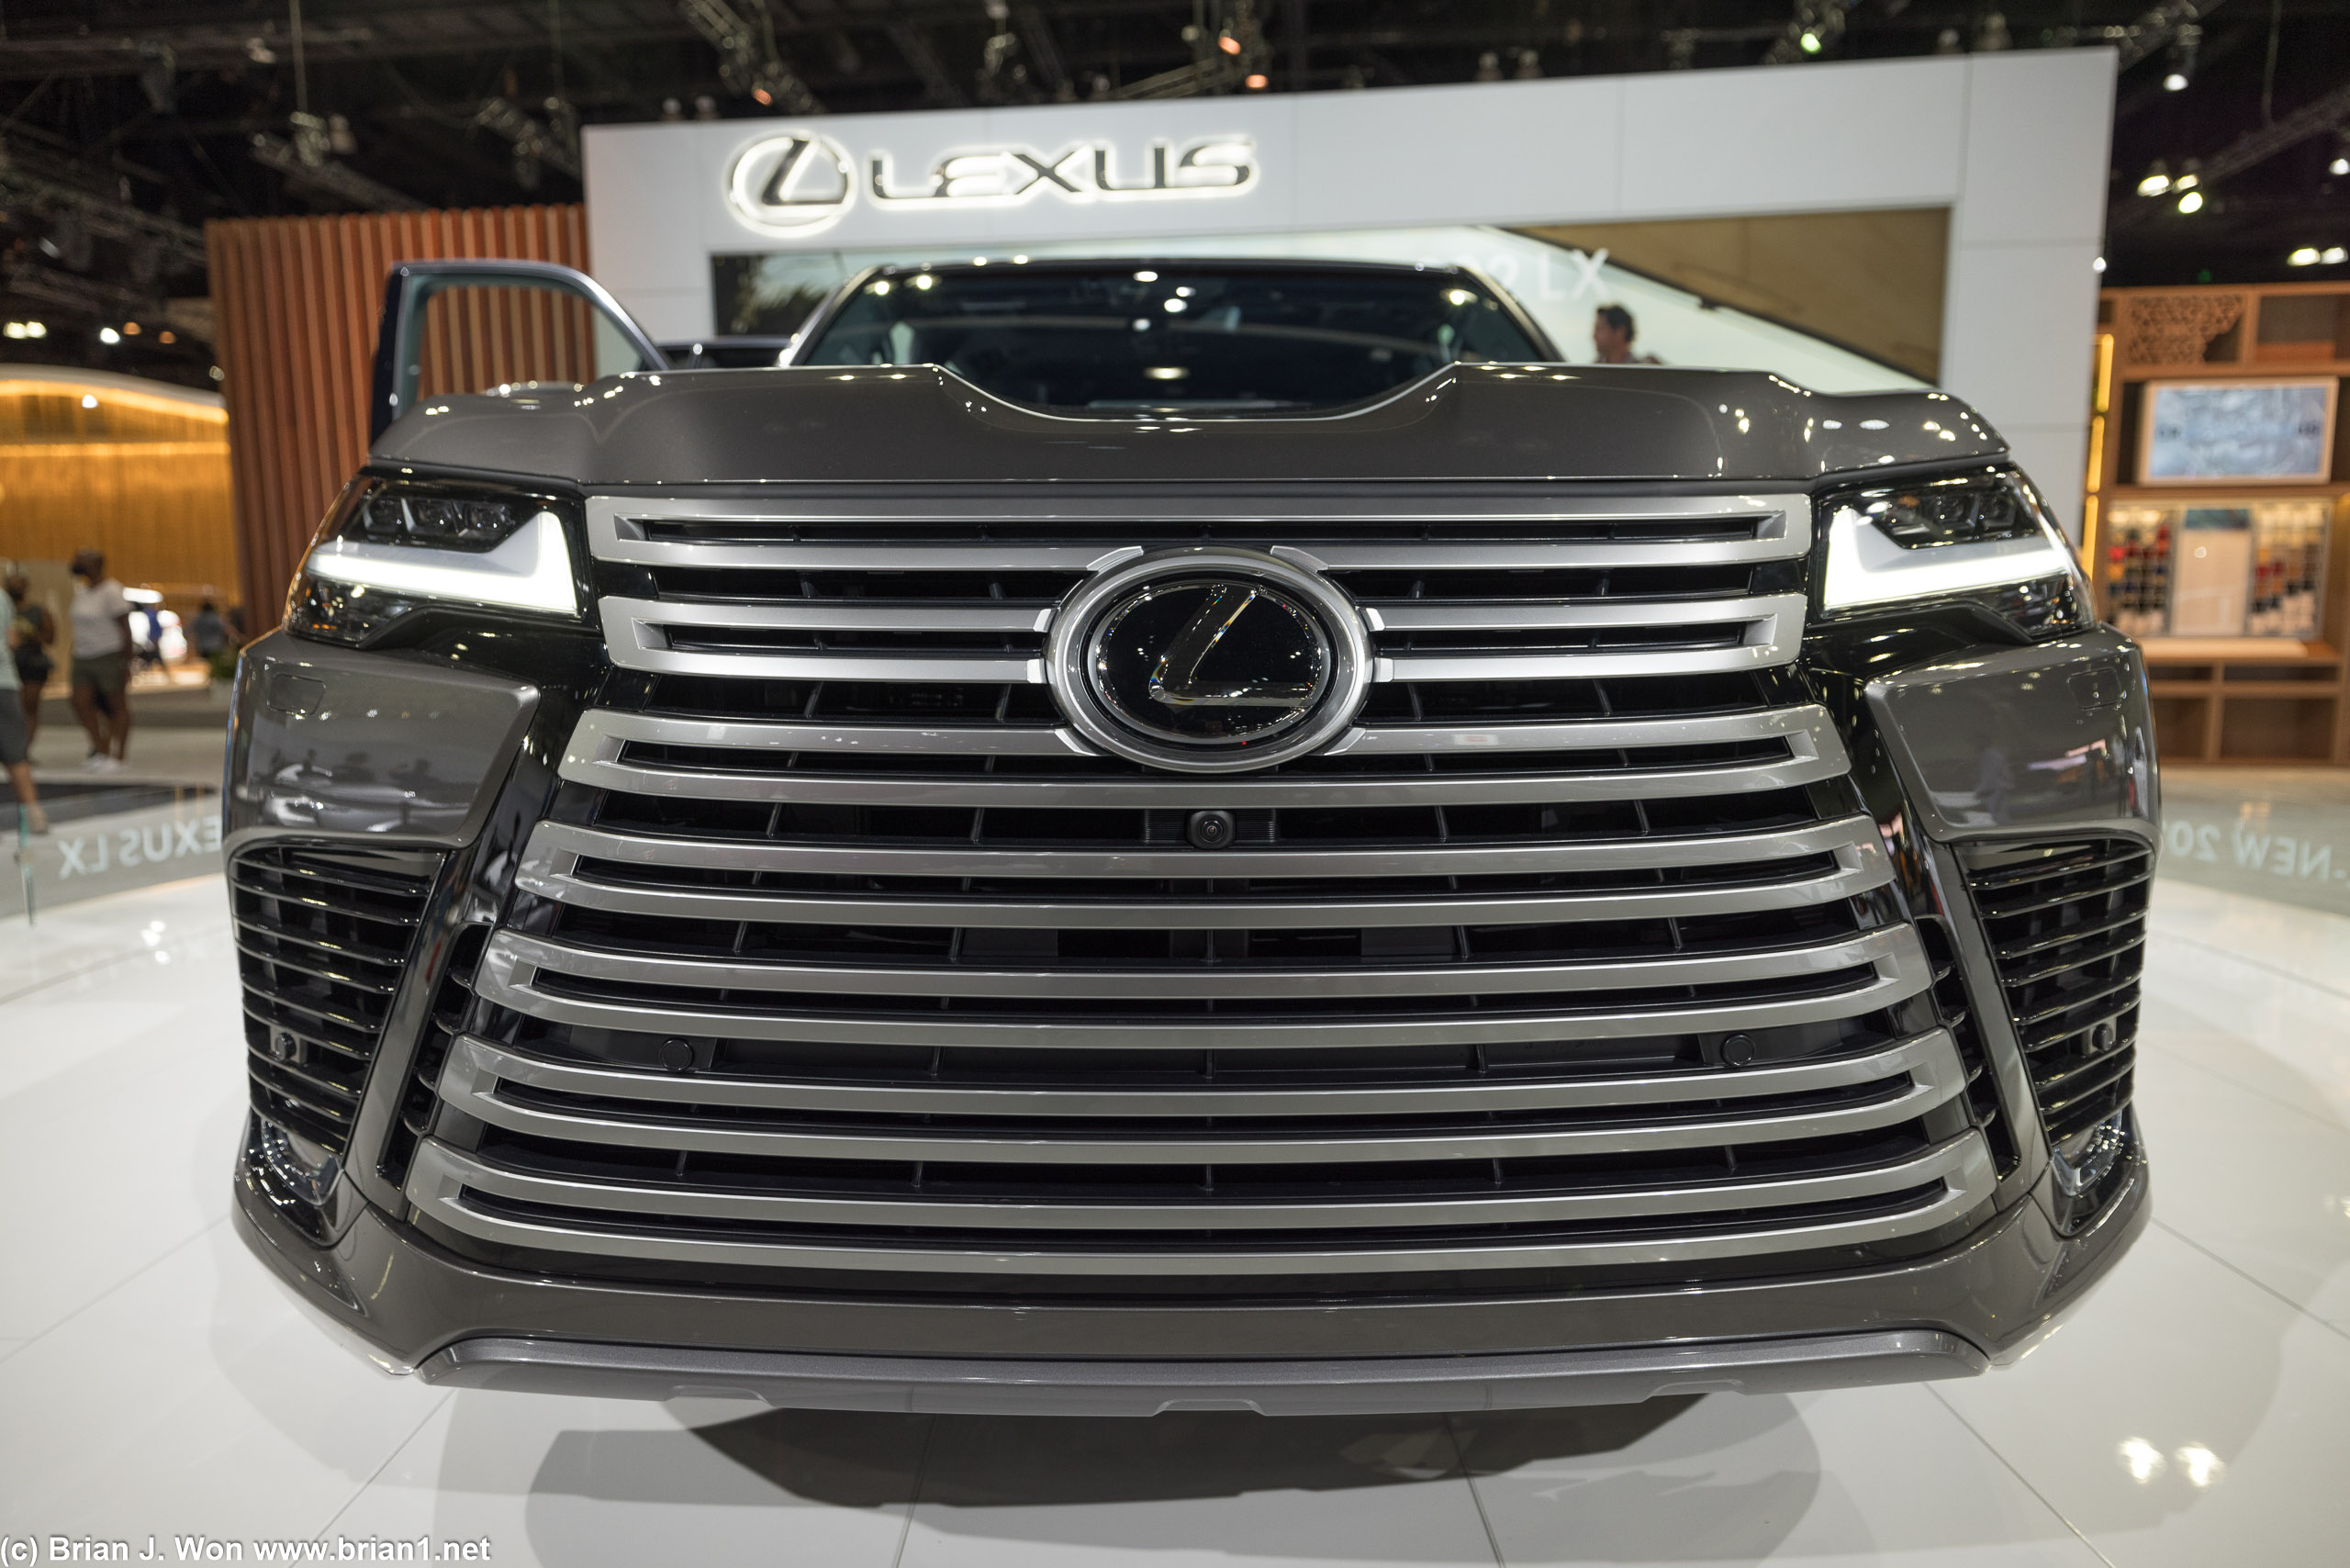 Grilles are increasingly huge these days, but this is next-level.